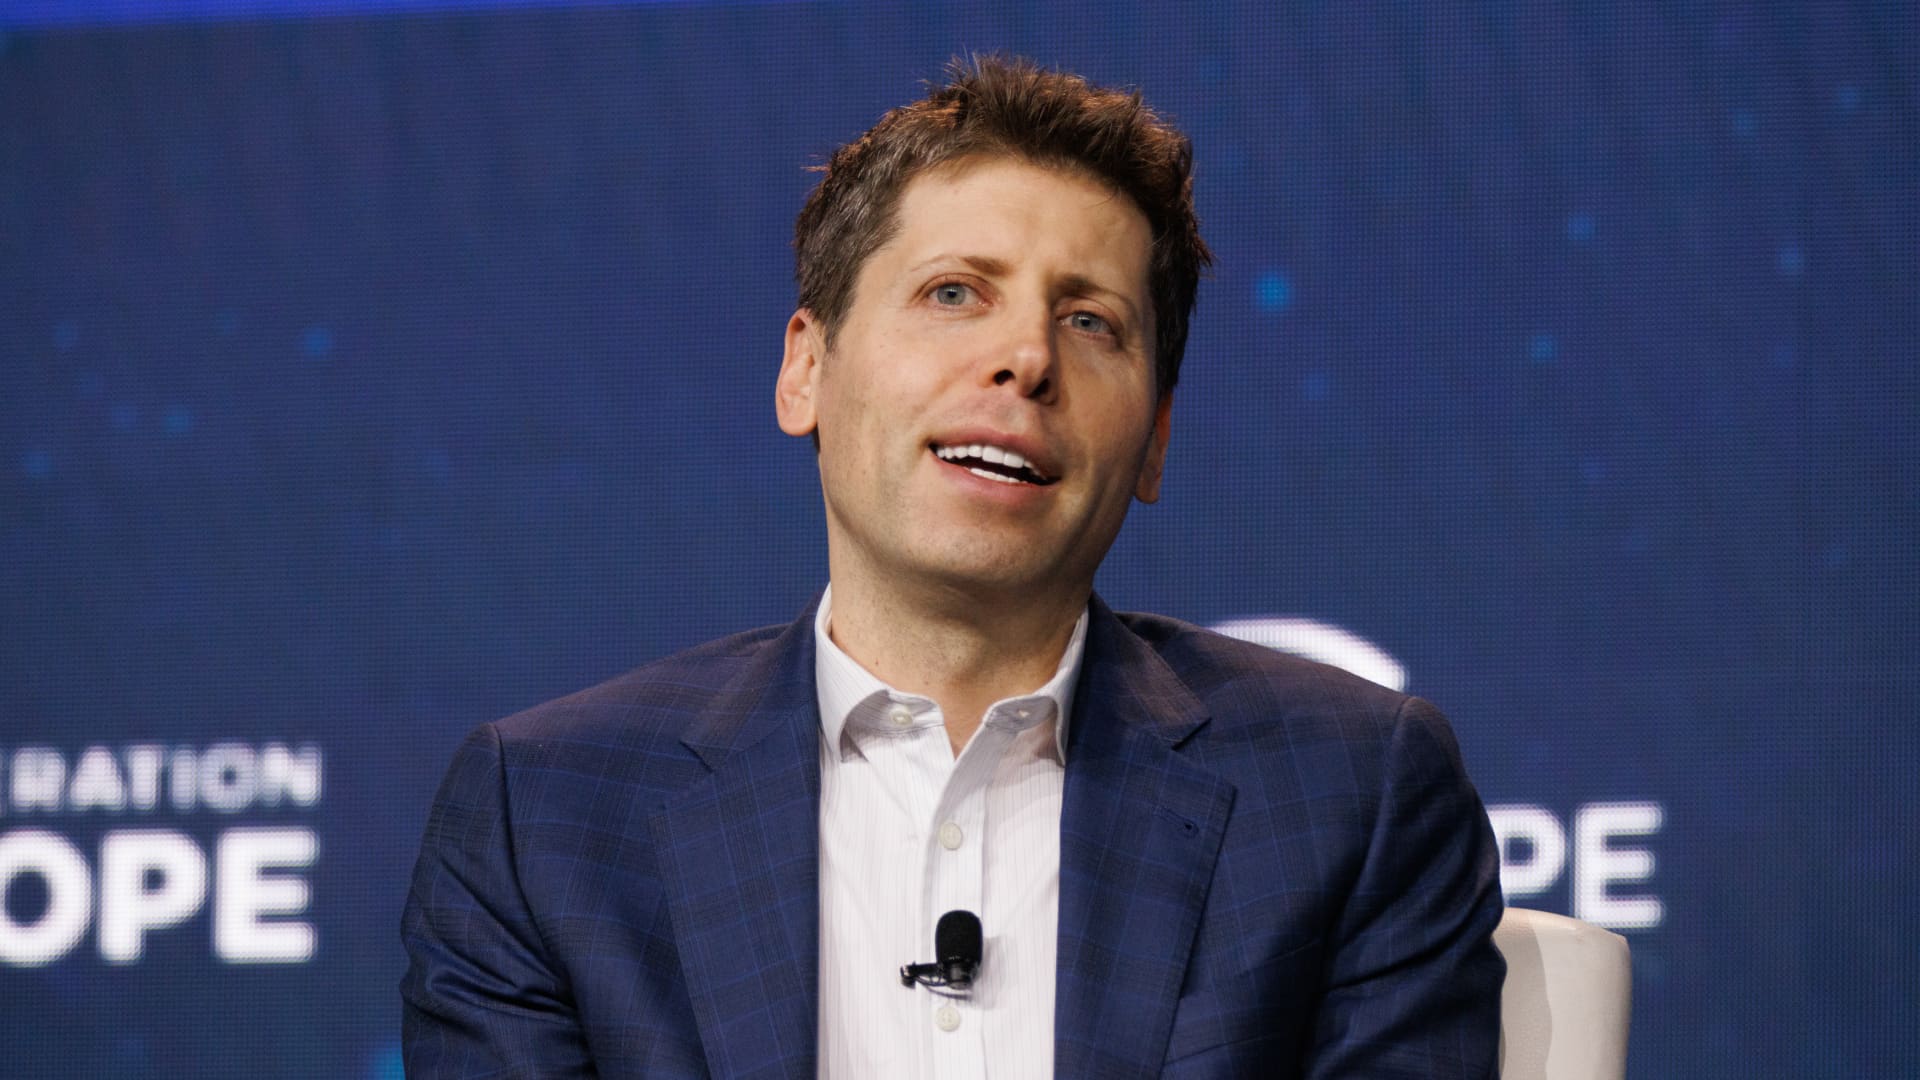 OpenAI CEO Sam Altman seeks as much as  trillion for new AI chip project: WSJ